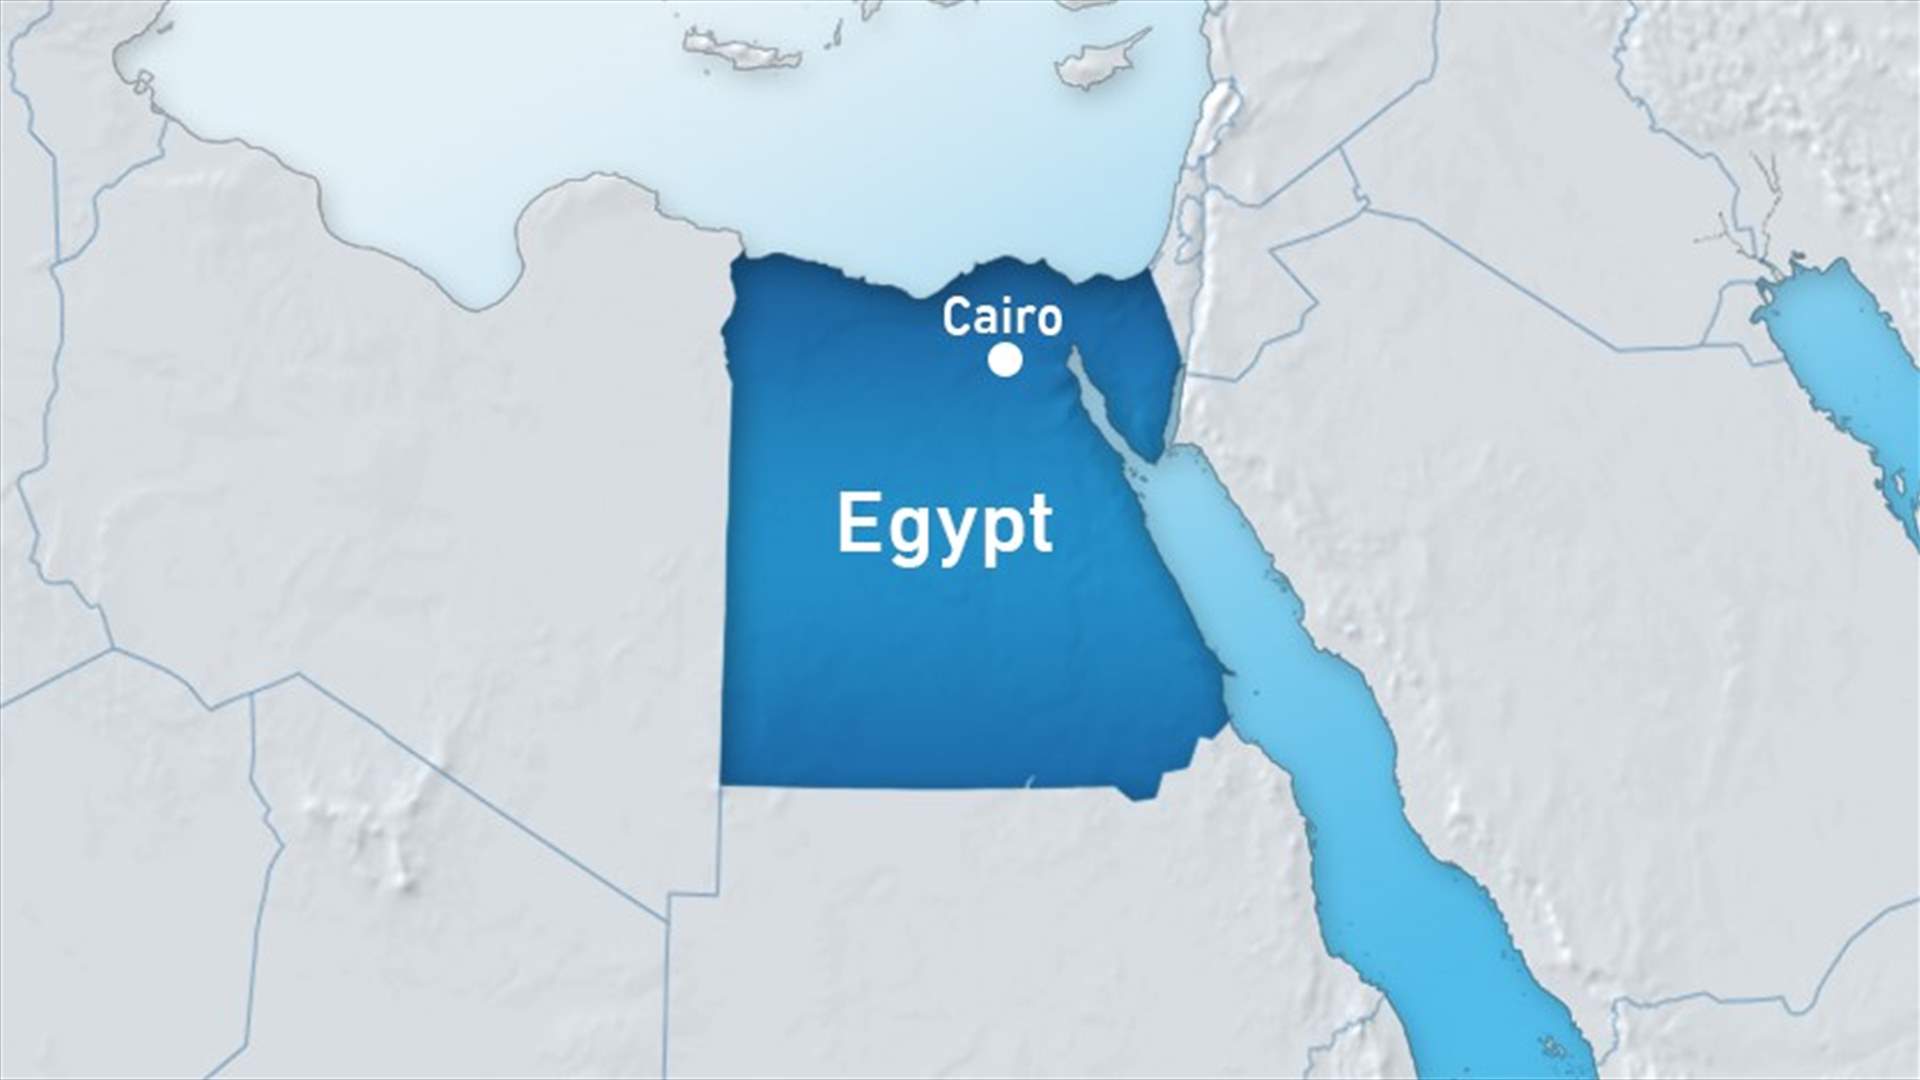 Egypt expresses &quot;annoyance&quot; with U.S. embassy over threat warning   